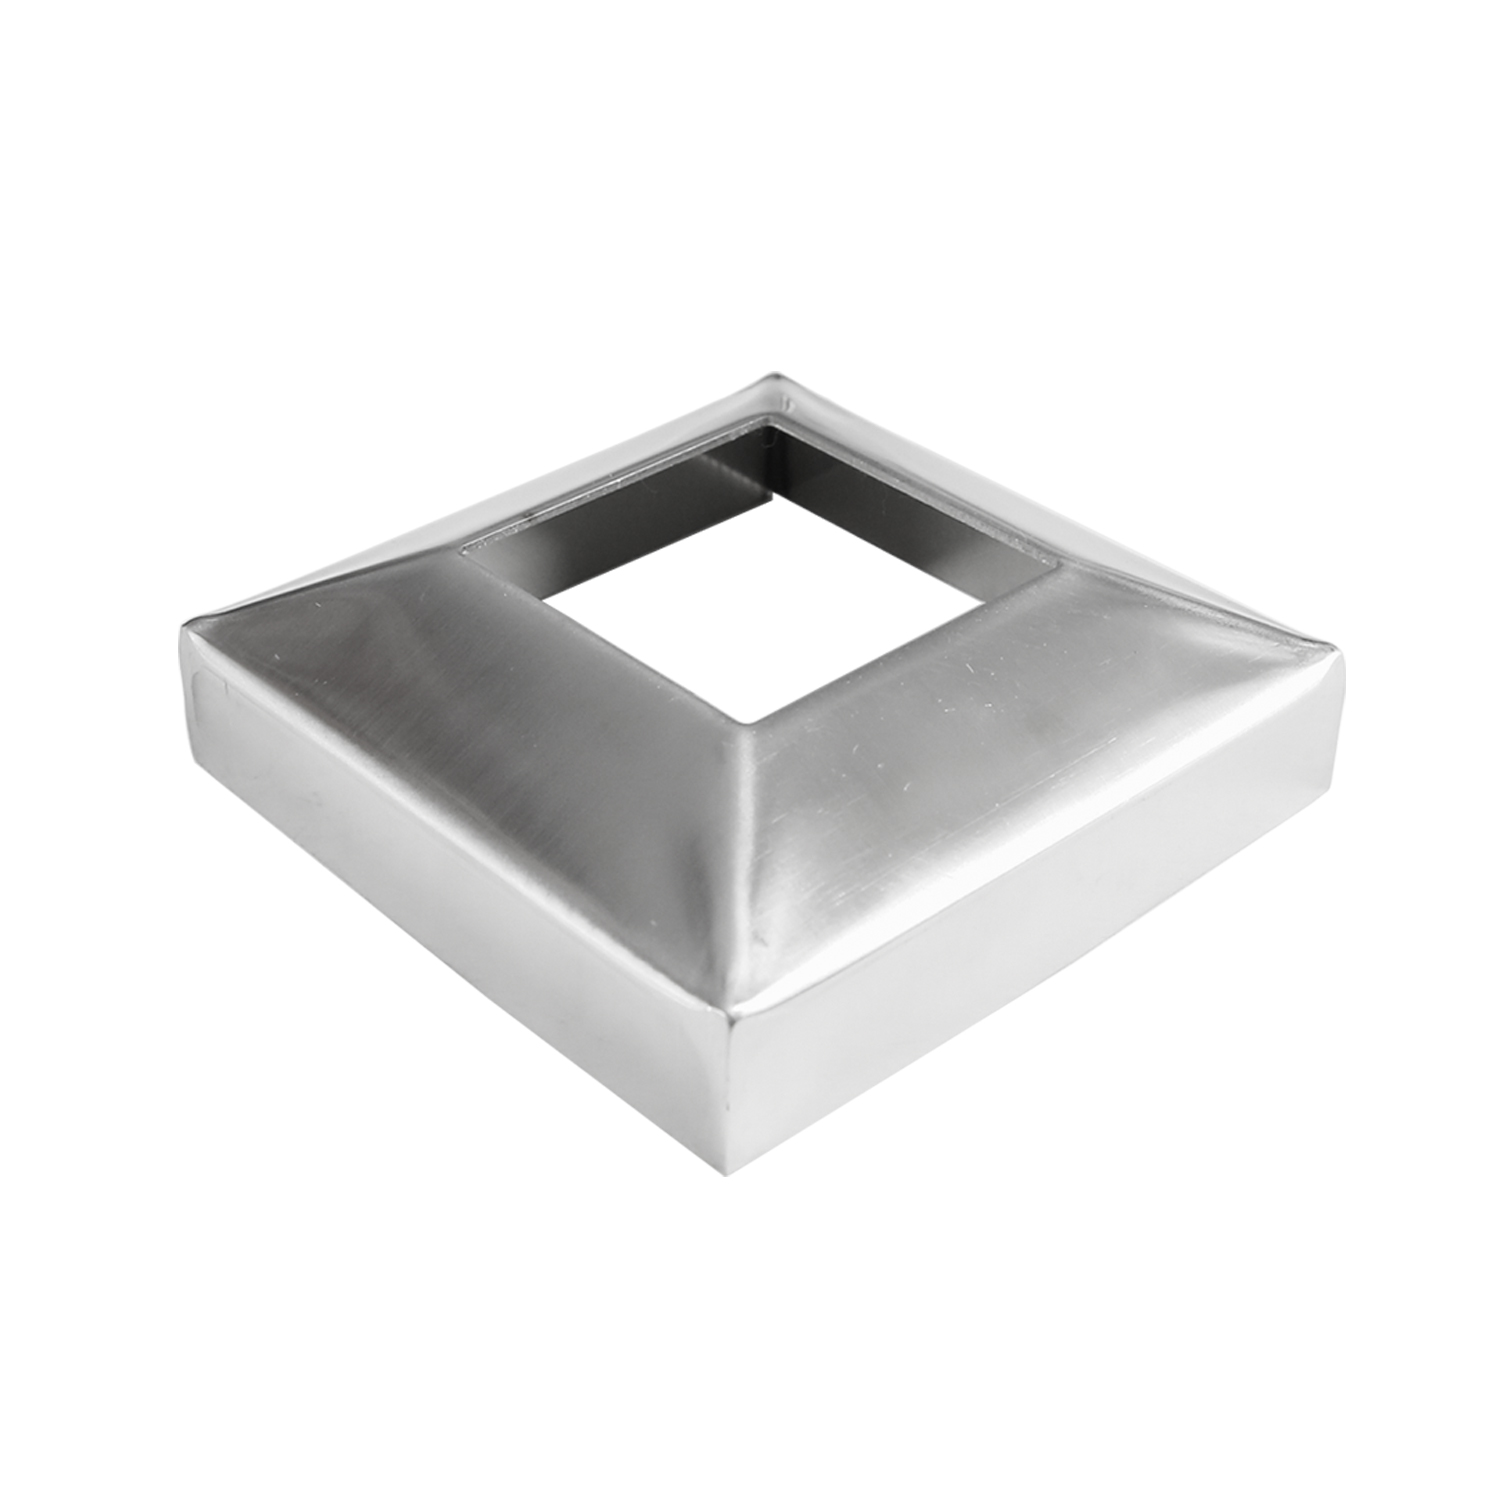 Stainless Steel 316 grade Base Flange Plus Base Cover for 2”x2” Square Post 